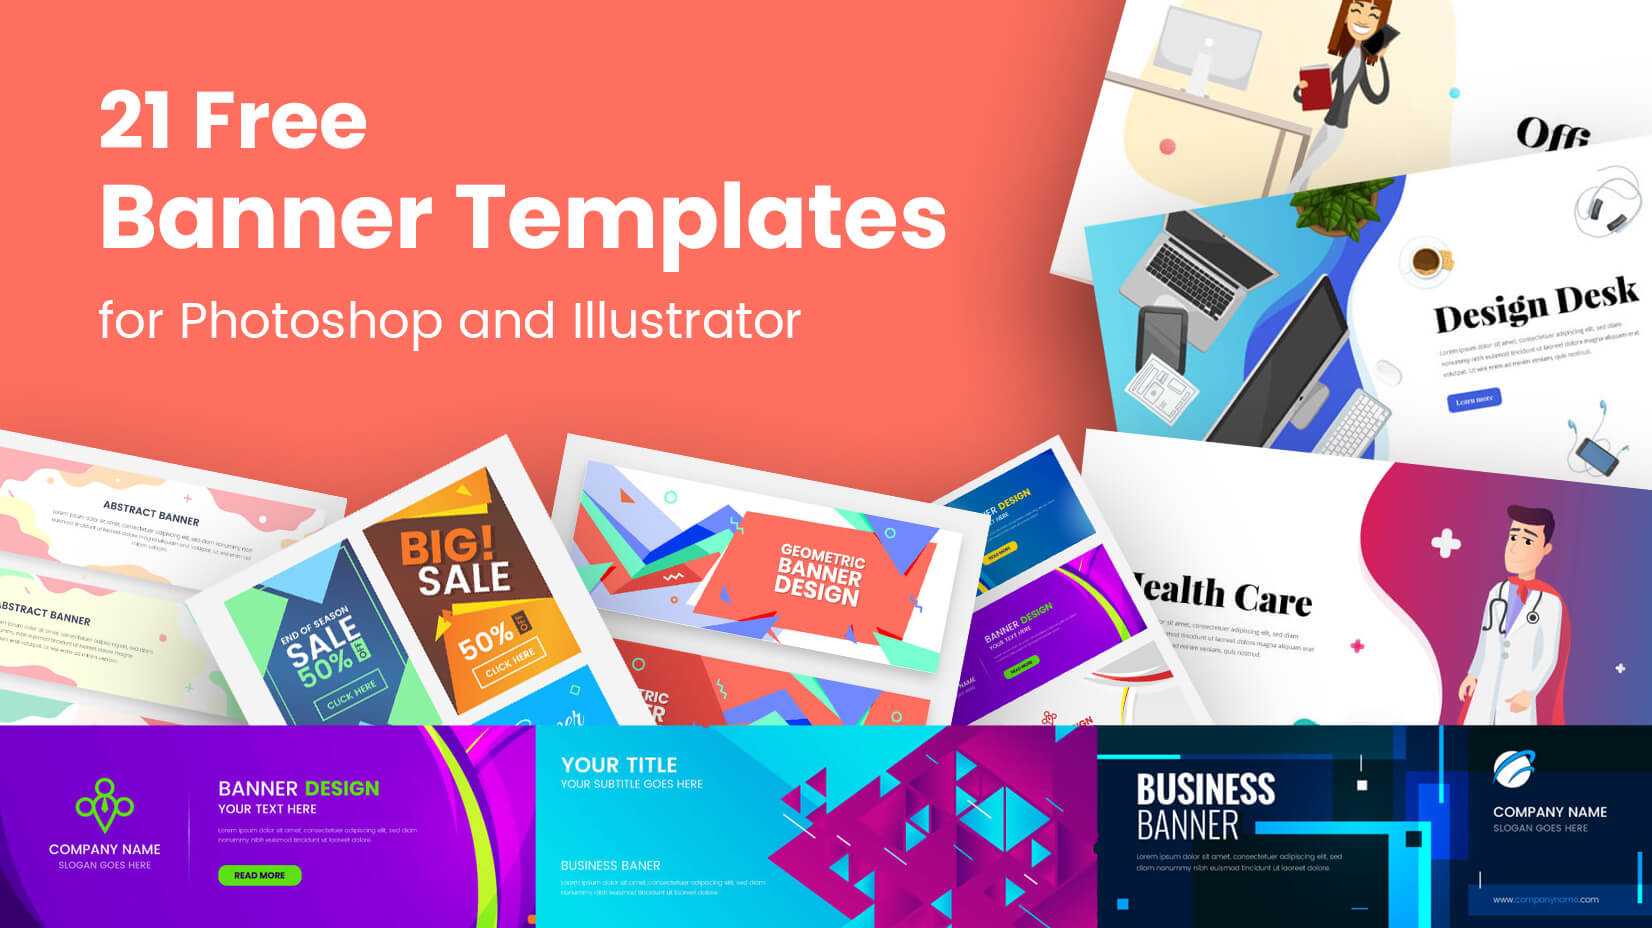 040 Free Banner Templates For Photoshop And Illustrator Throughout Free Website Banner Templates Download